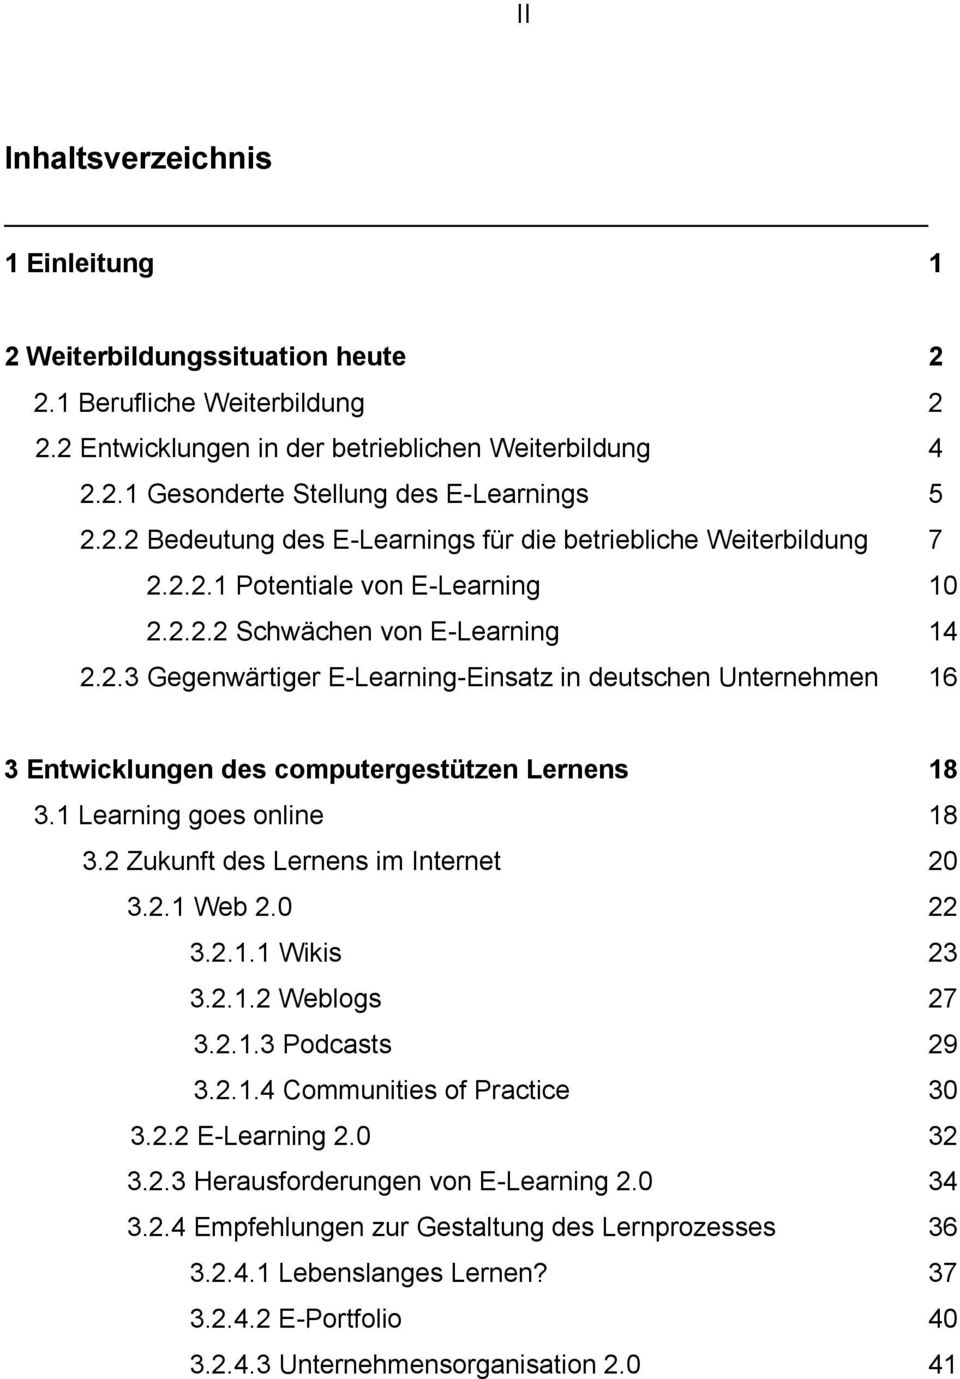 1 Learning goes online 18 3.2 Zukunft des Lernens im Internet 20 3.2.1 Web 2.0 22 3.2.1.1 Wikis 23 3.2.1.2 Weblogs 27 3.2.1.3 Podcasts 29 3.2.1.4 Communities of Practice 30 3.2.2 E-Learning 2.0 32 3.